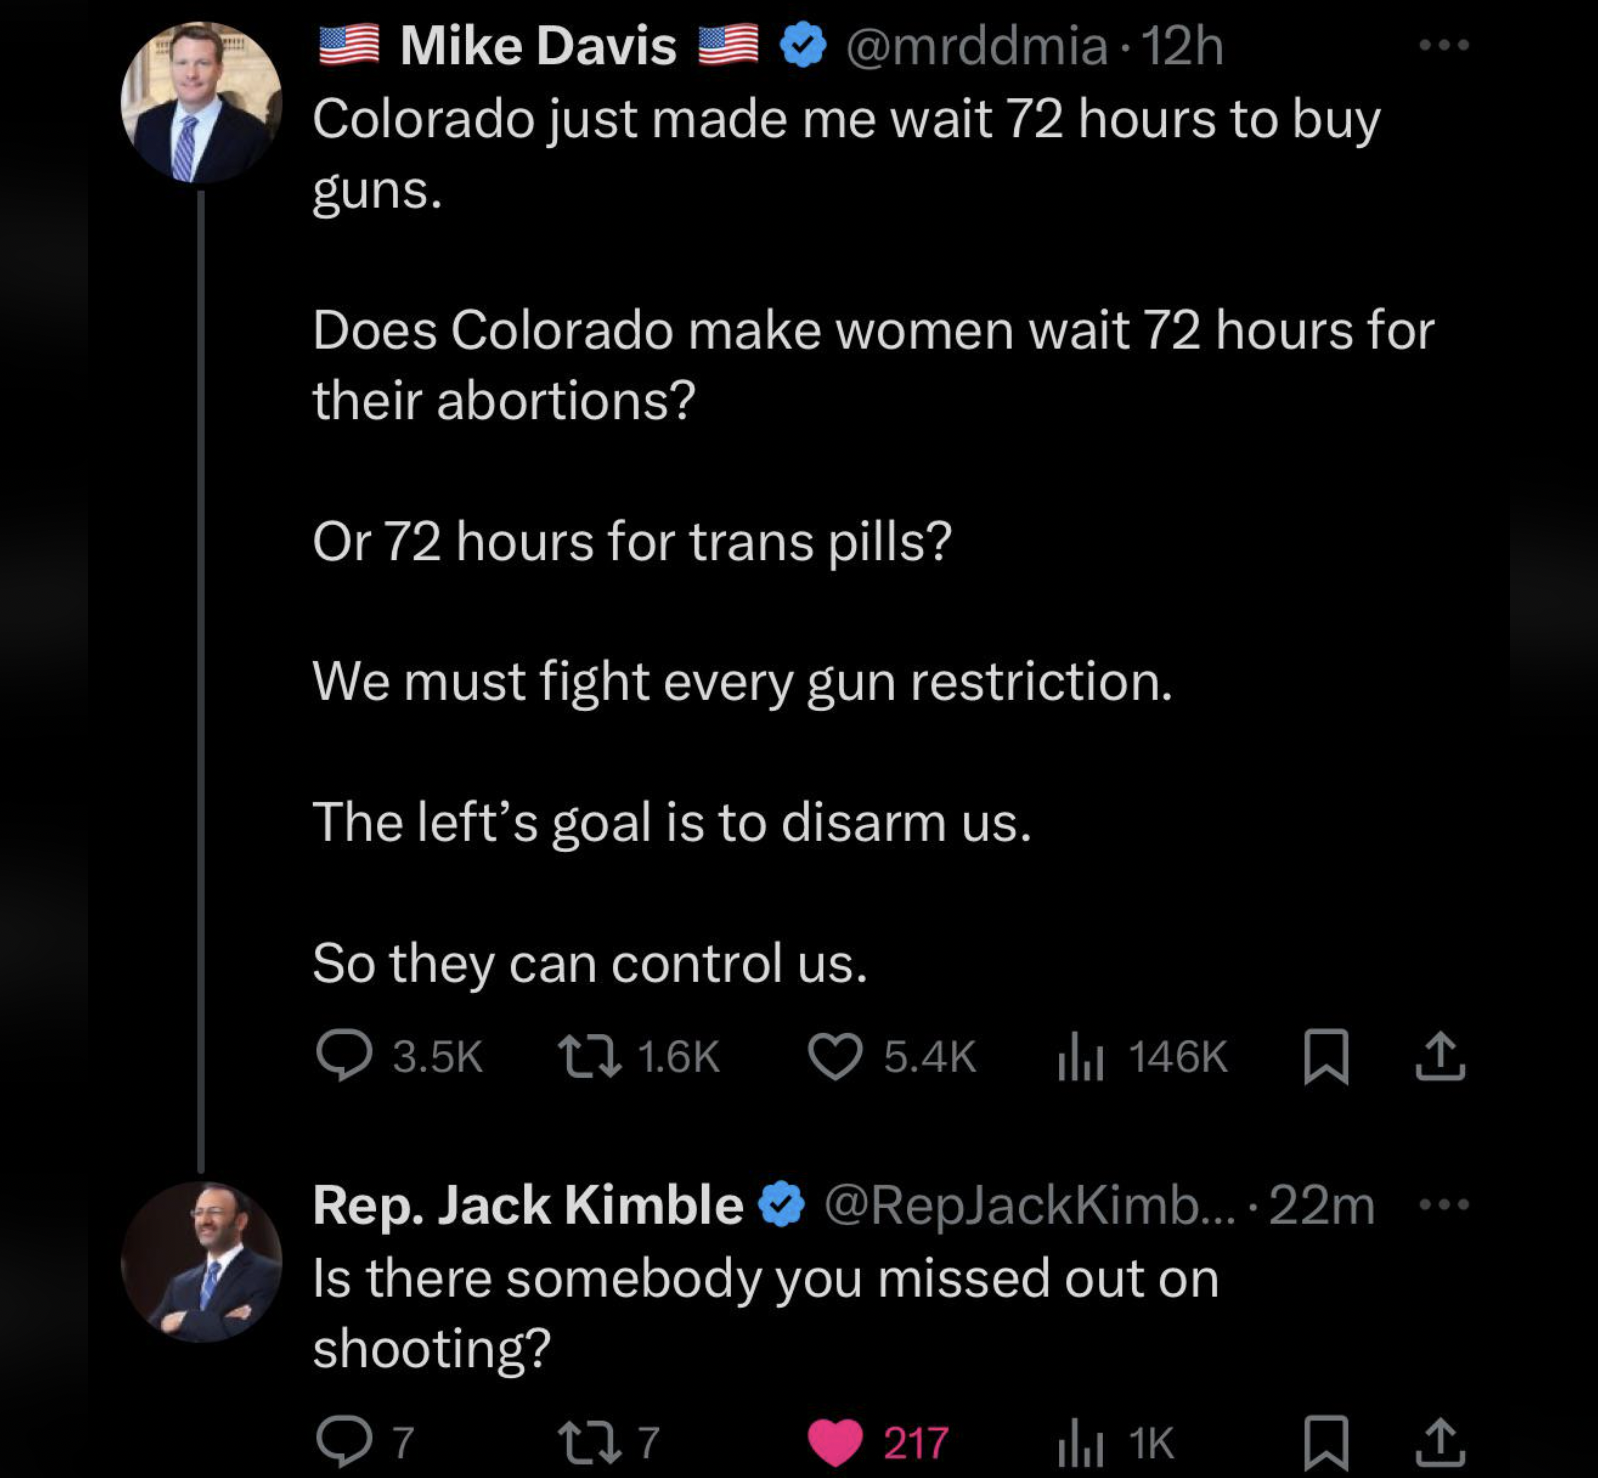 screenshot - Mike Davis 12h Colorado just made me wait 72 hours to buy guns. Does Colorado make women wait 72 hours for their abortions? Or 72 hours for trans pills? We must fight every gun restriction. The left's goal is to disarm us. So they can control